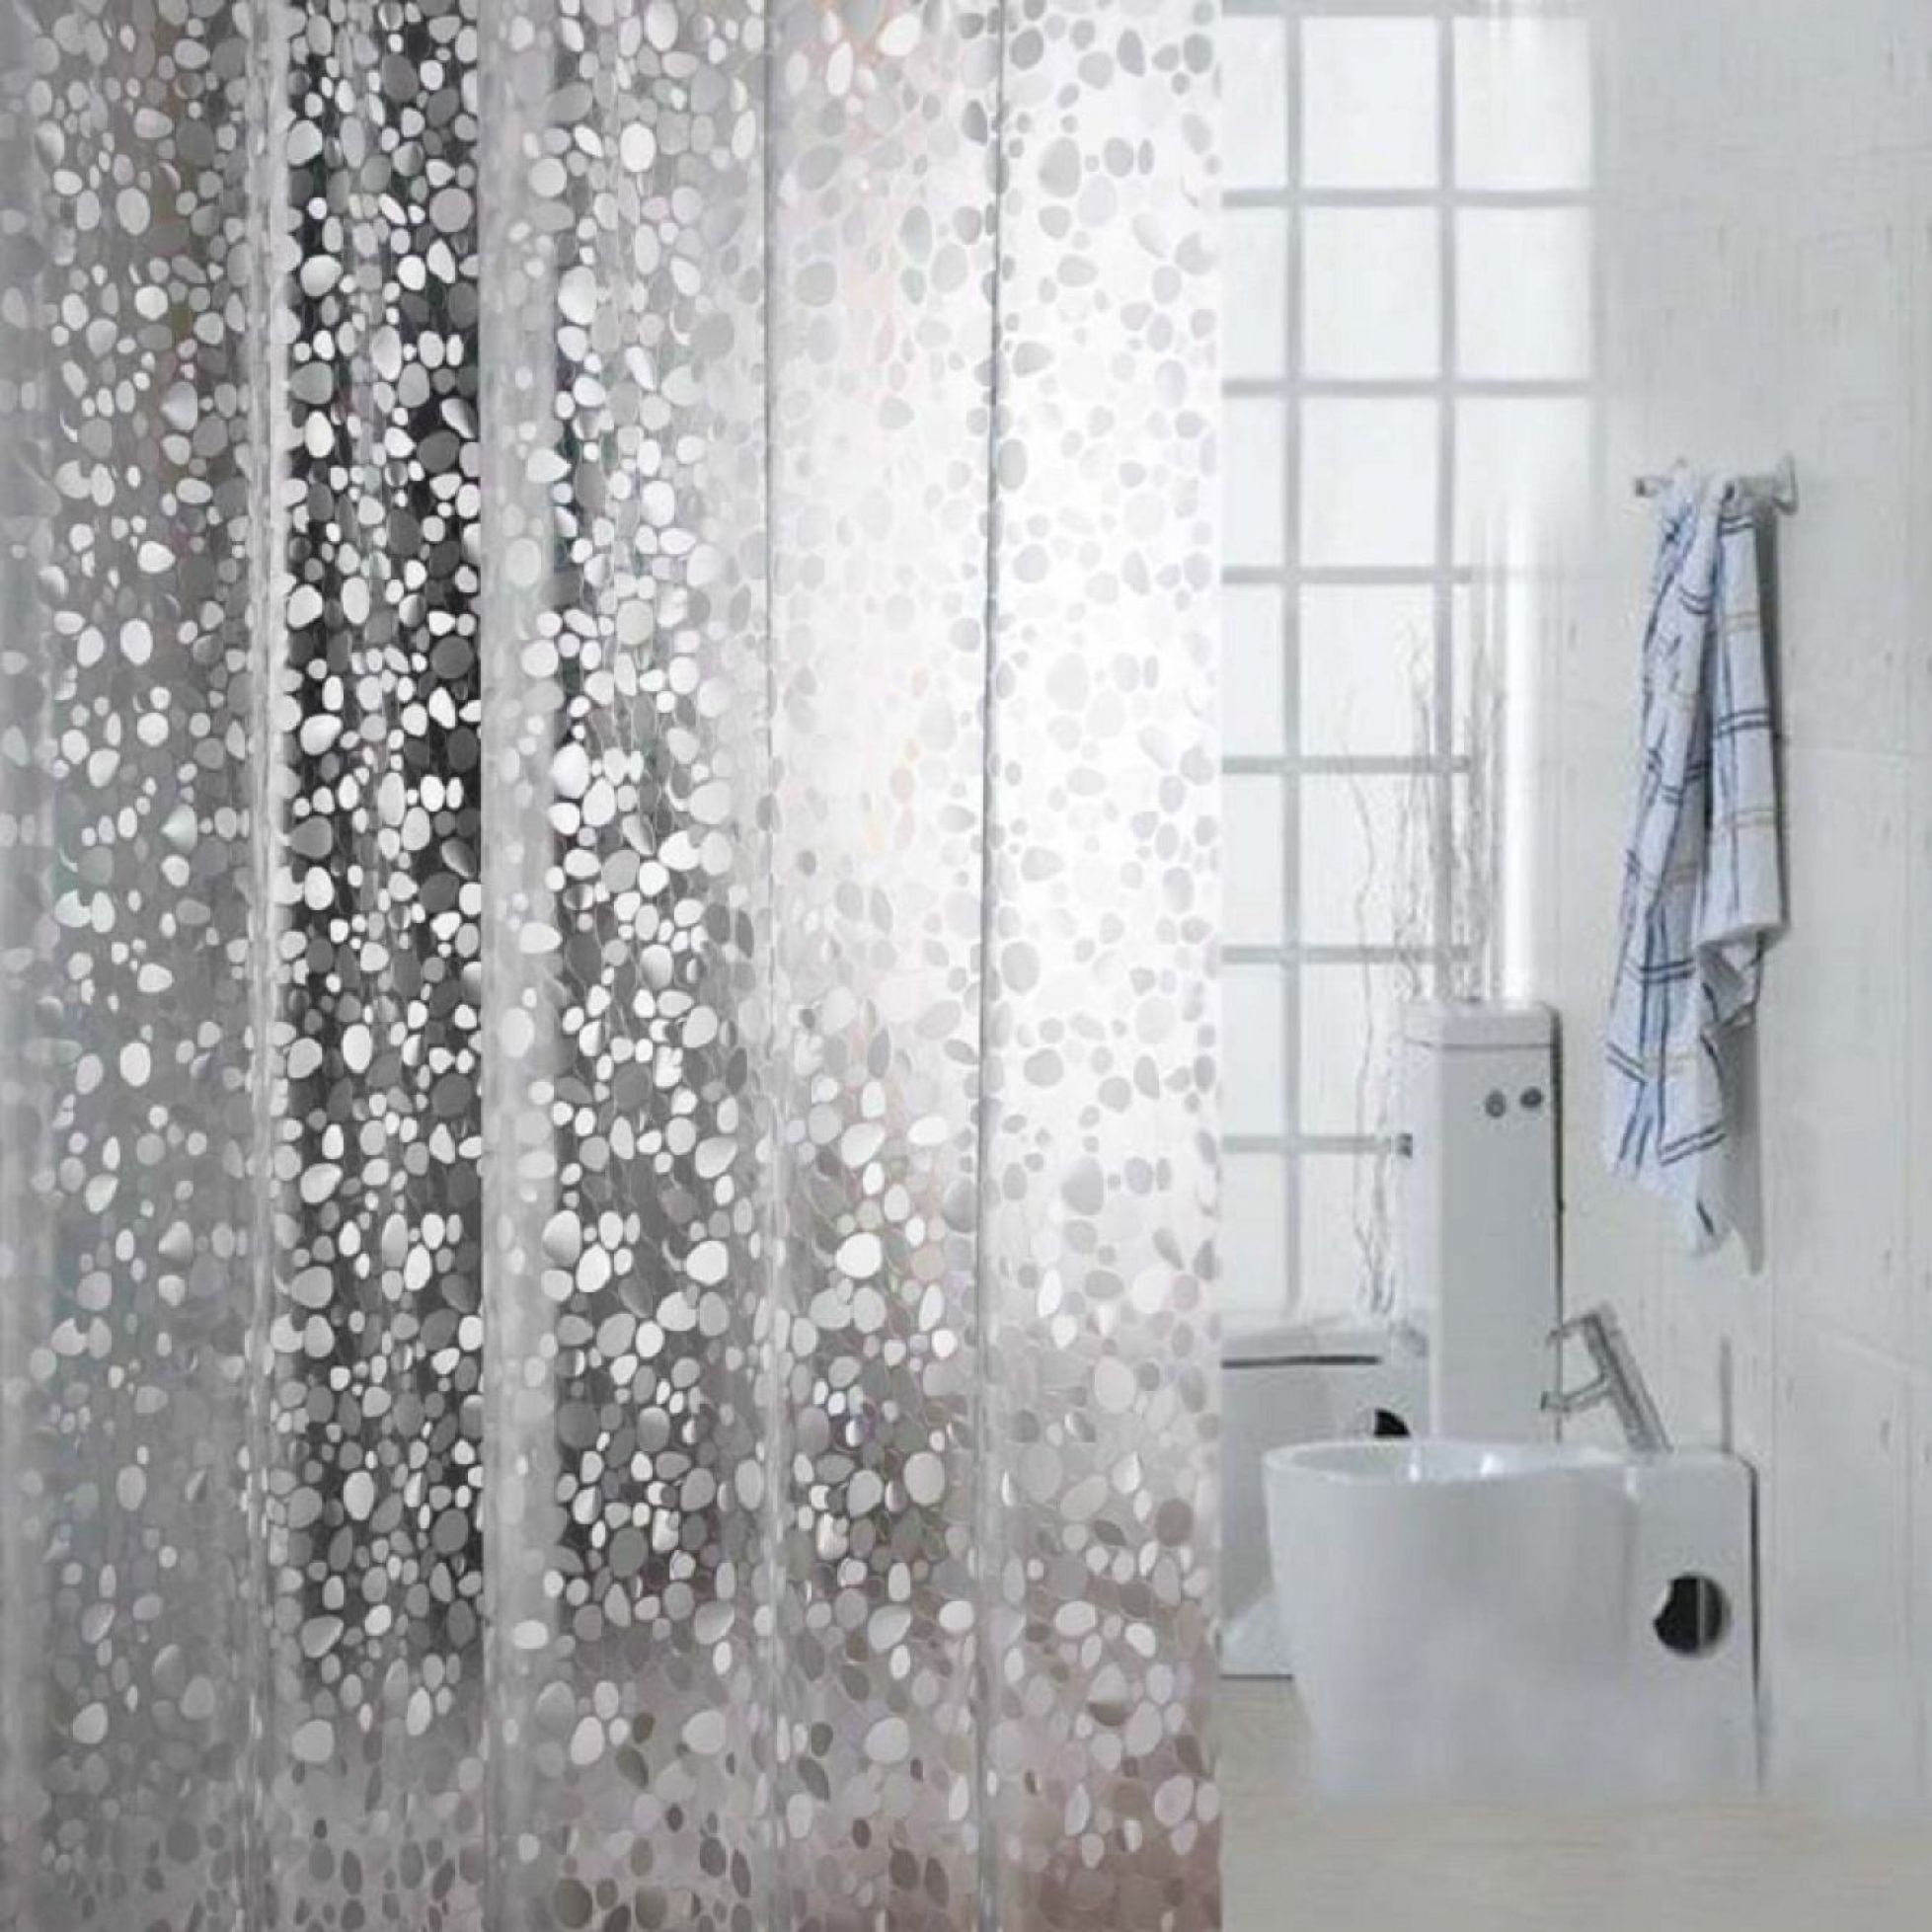 A small bathroom with clear shower curtains.